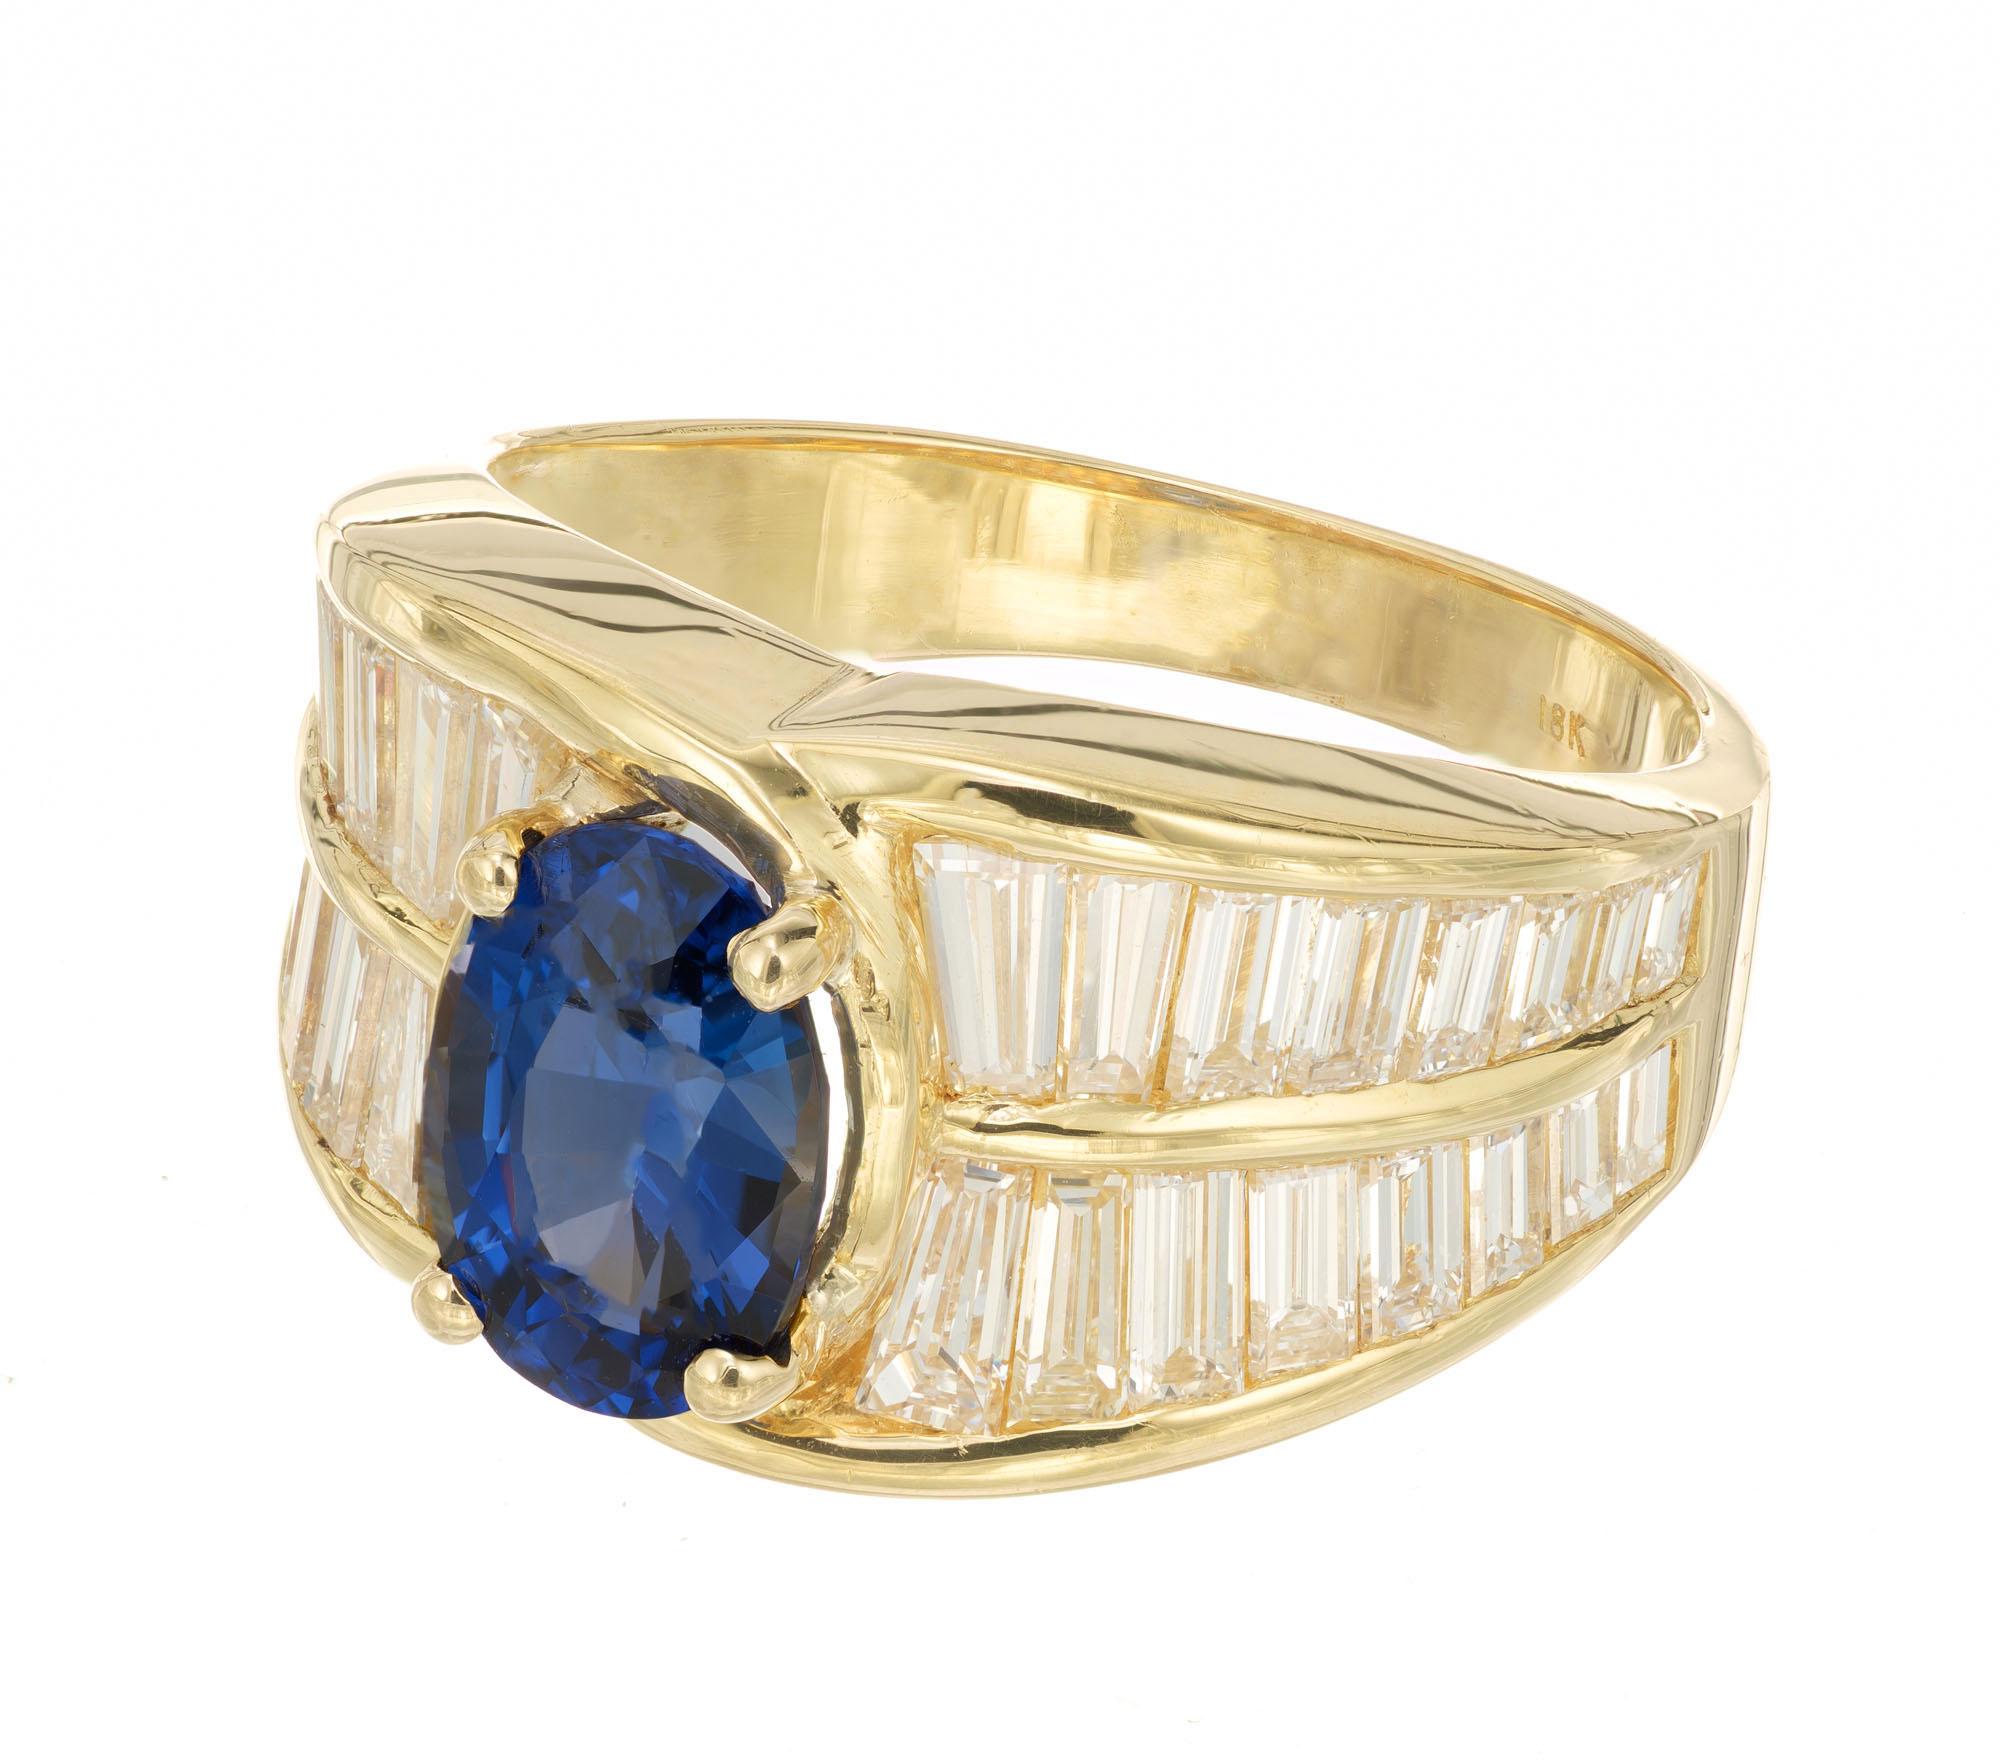 Peter Suchy GIA Certified 2.49 Carat Sapphire Diamond Yellow Gold Cocktail Ring In New Condition For Sale In Stamford, CT